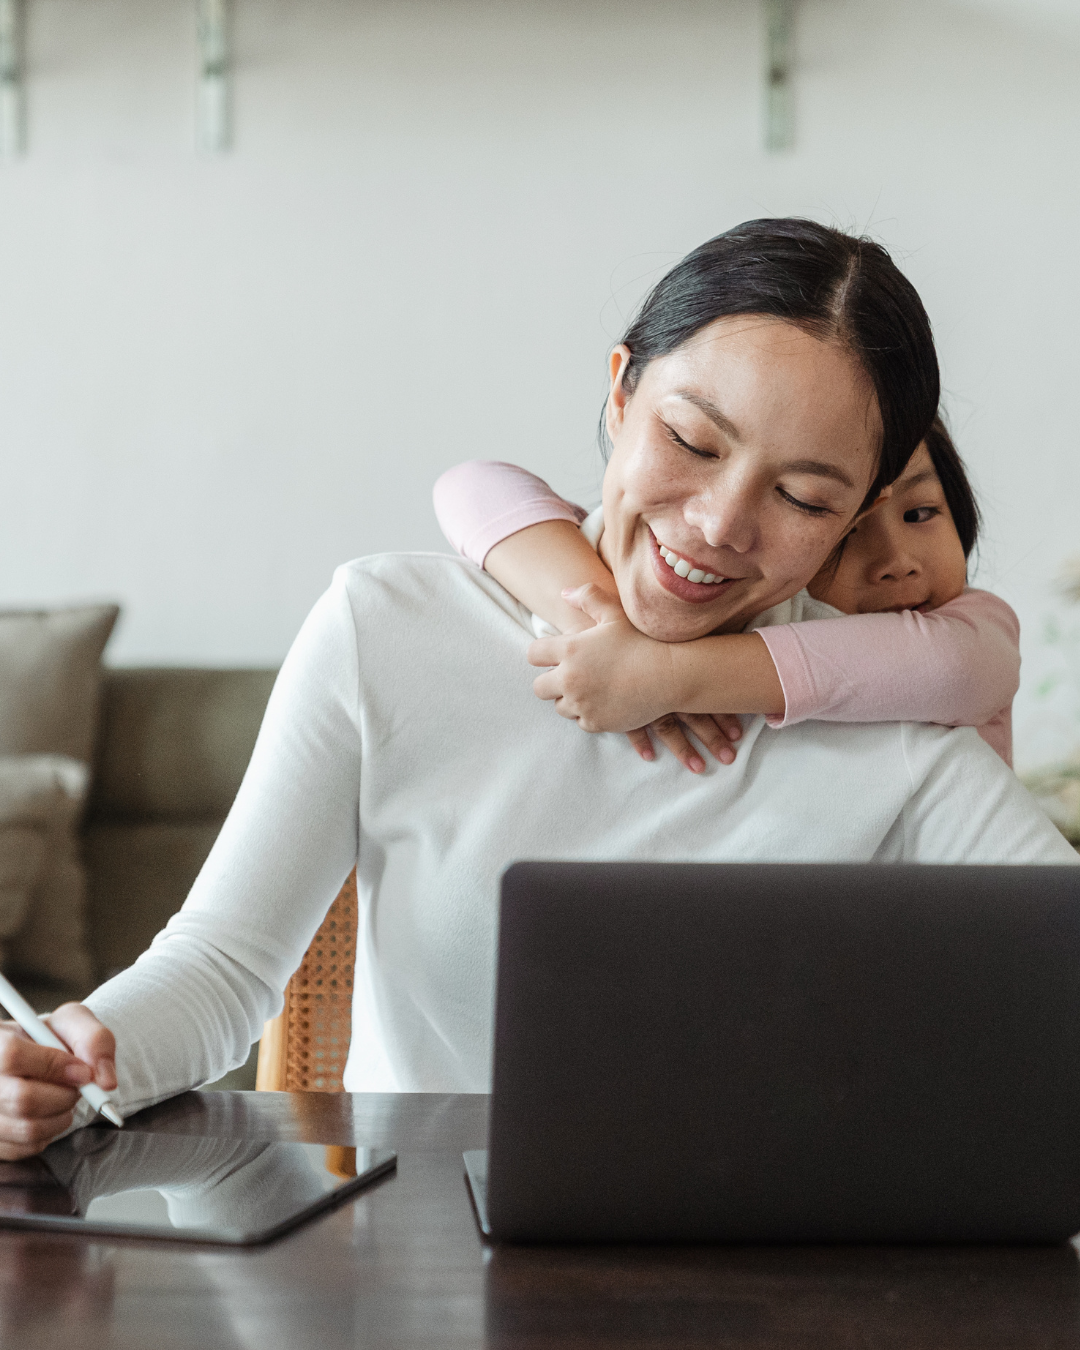 A woman at her desk trying to work while her daughter hugs her back, then they both smile.